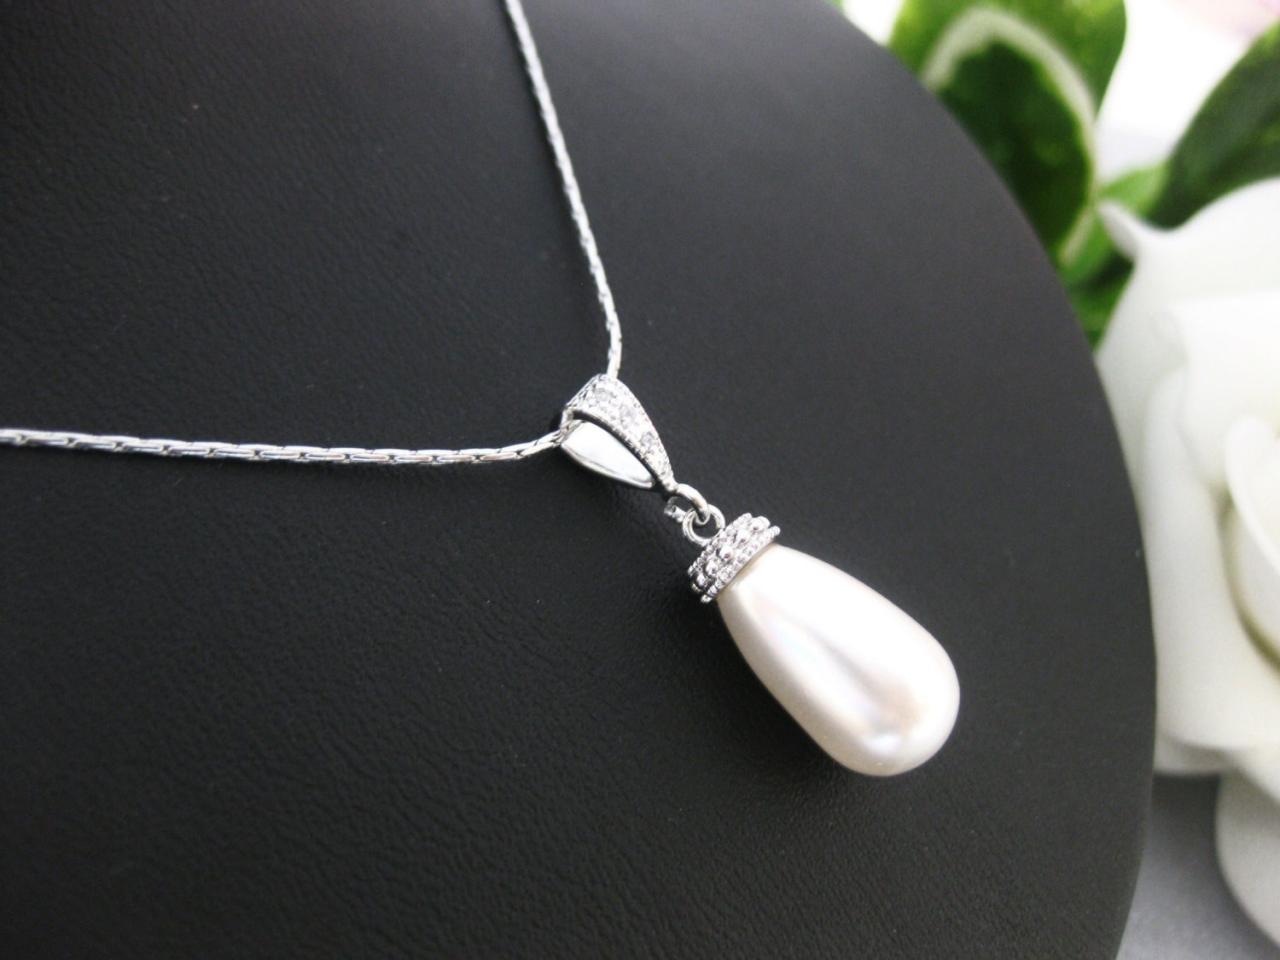 Bridal Pearl Necklace Wedding Necklace Swarovski Teardrop Pearl Bridesmaid Necklace Wedding Jewelry Bridesmaid Gift Pearl Pendant (n028)